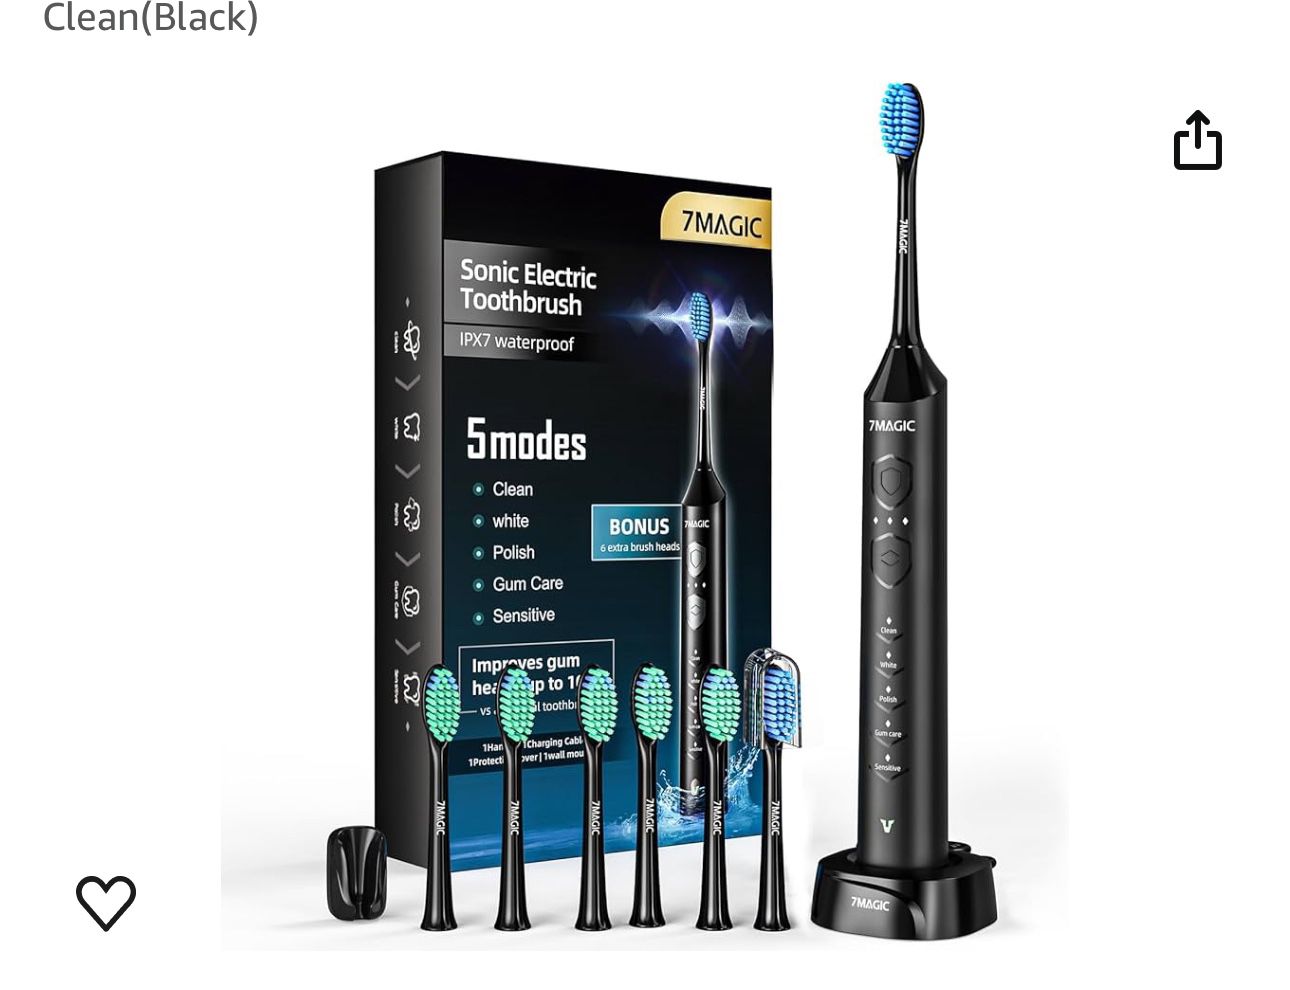 Sonic Electrical Toothbrush 